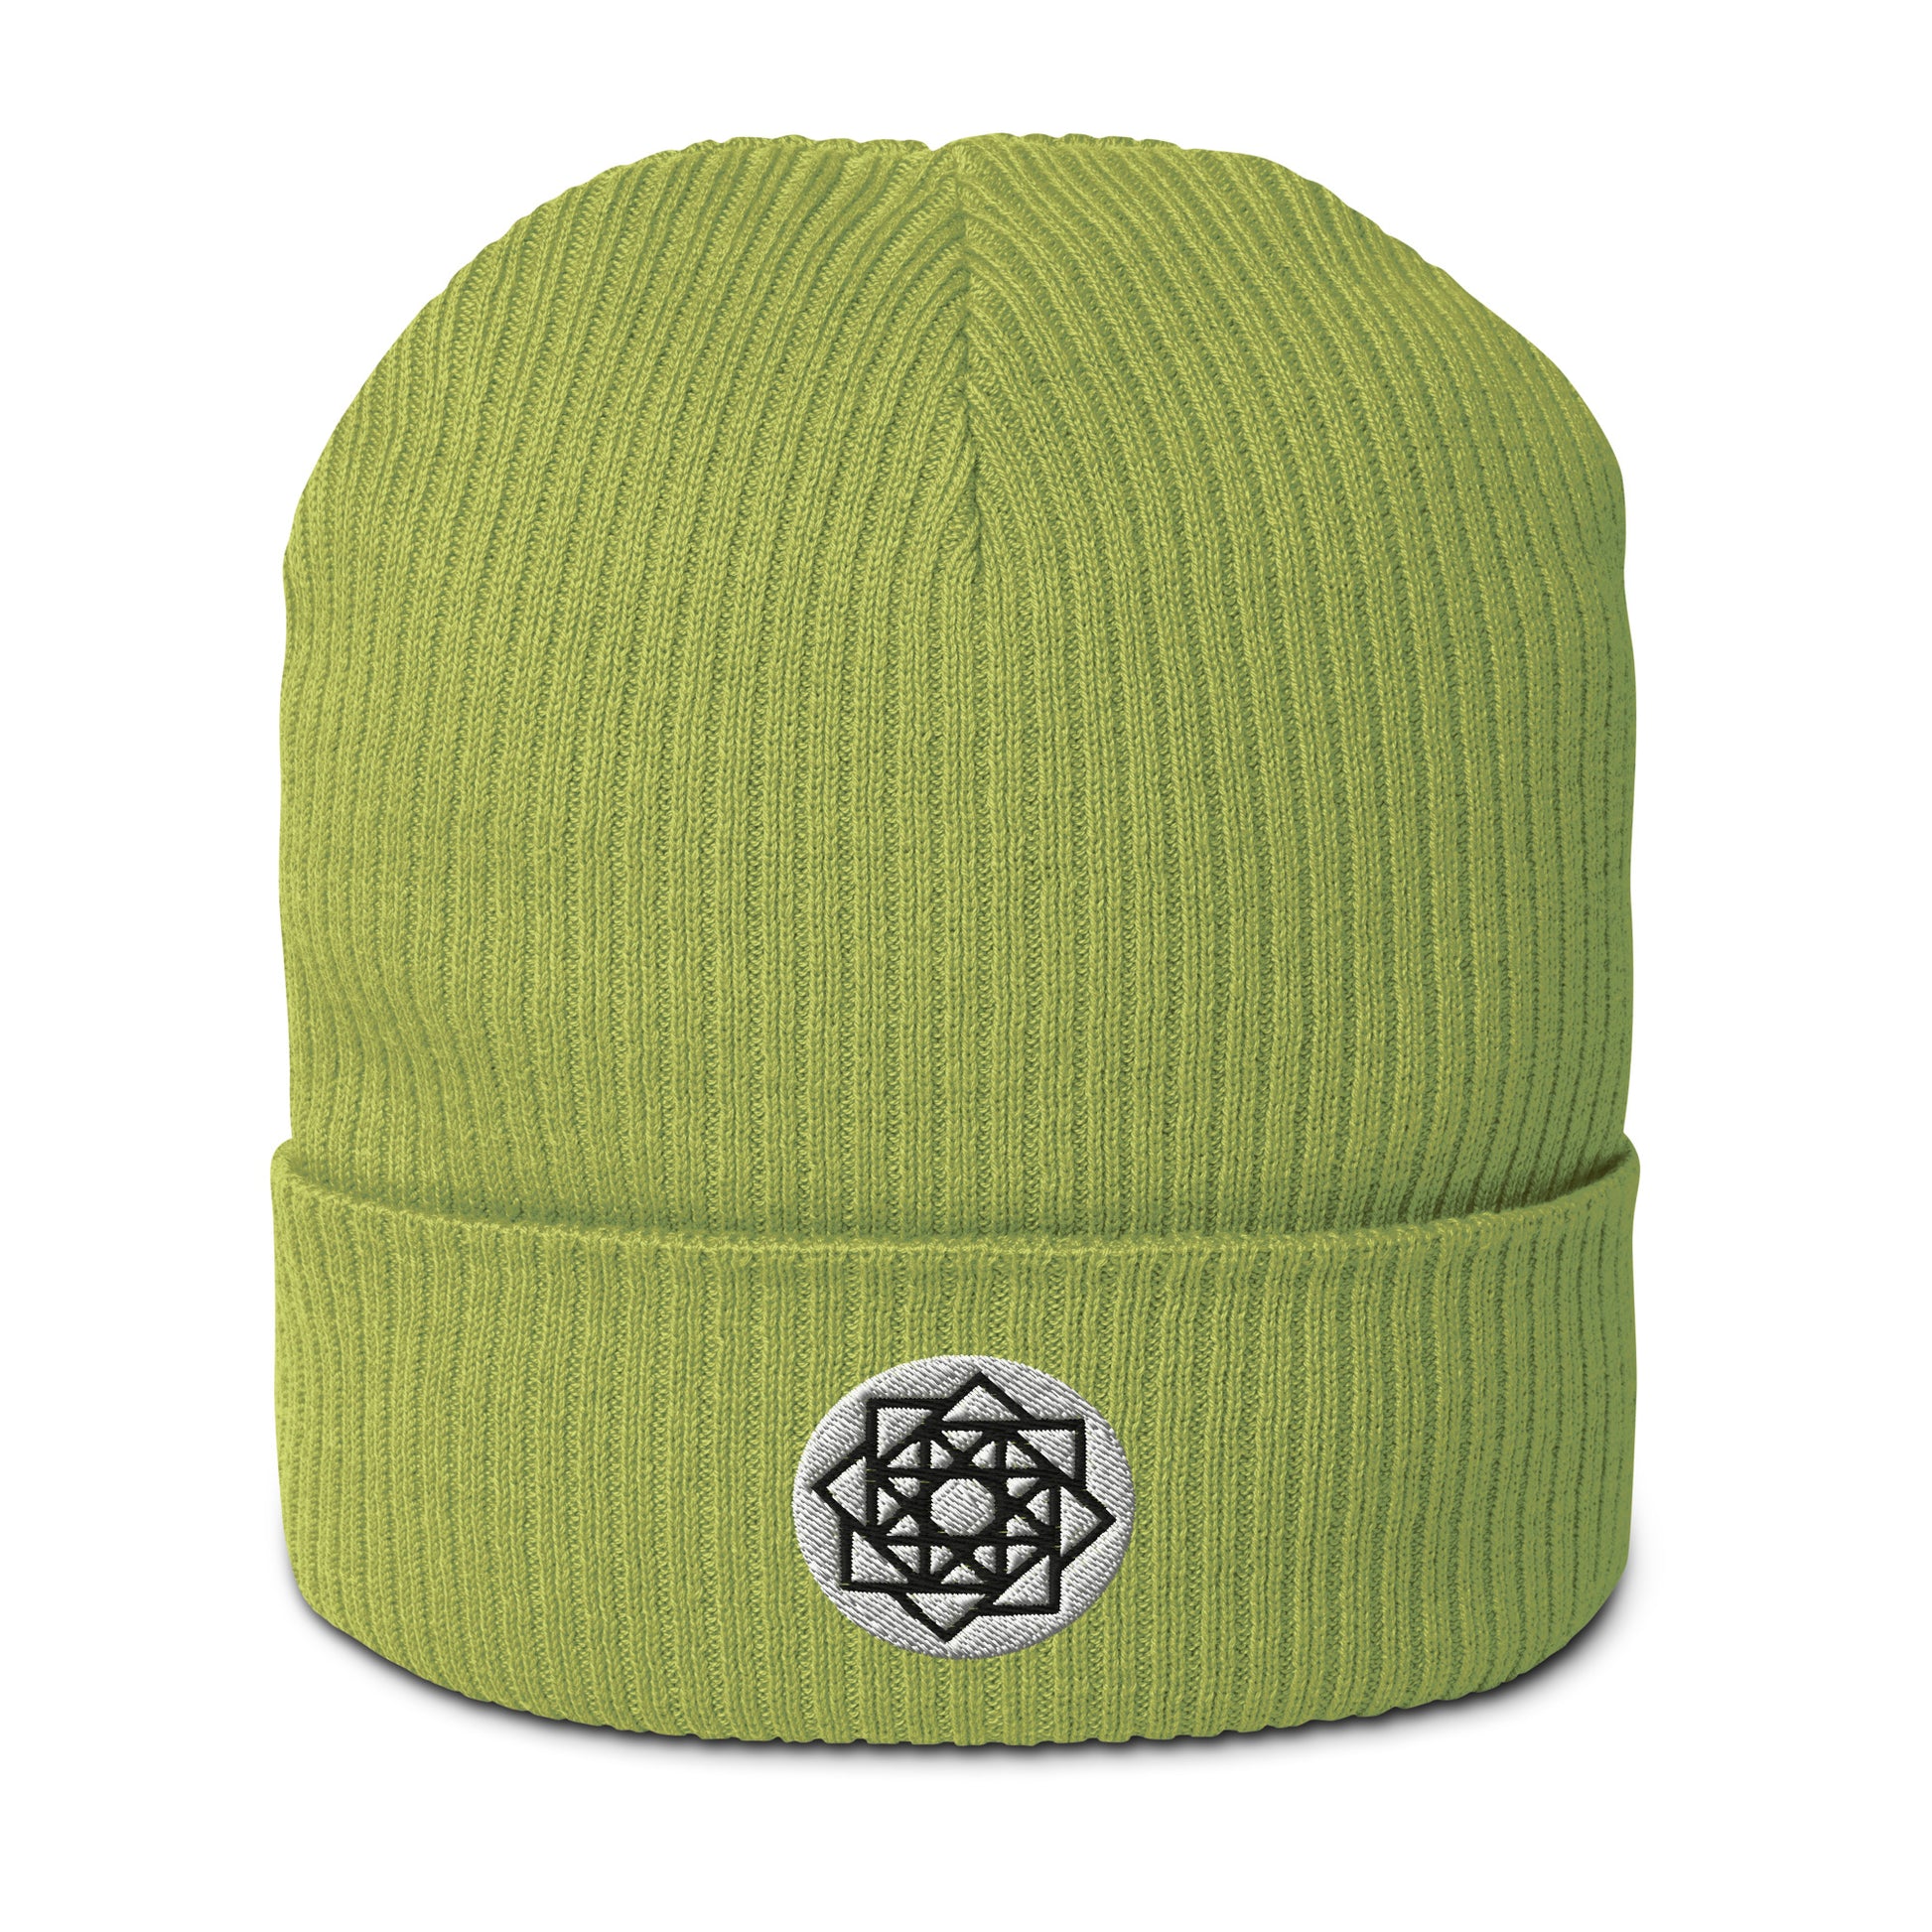 Allow me to introduce our Square Matrix Beanie in Apple Green, a testament to cosmic order and mathematical elegance. Woven from the finest organic cotton and adorned with the precise geometry of the Square Matrix symbol, this beanie transcends mere headwear.